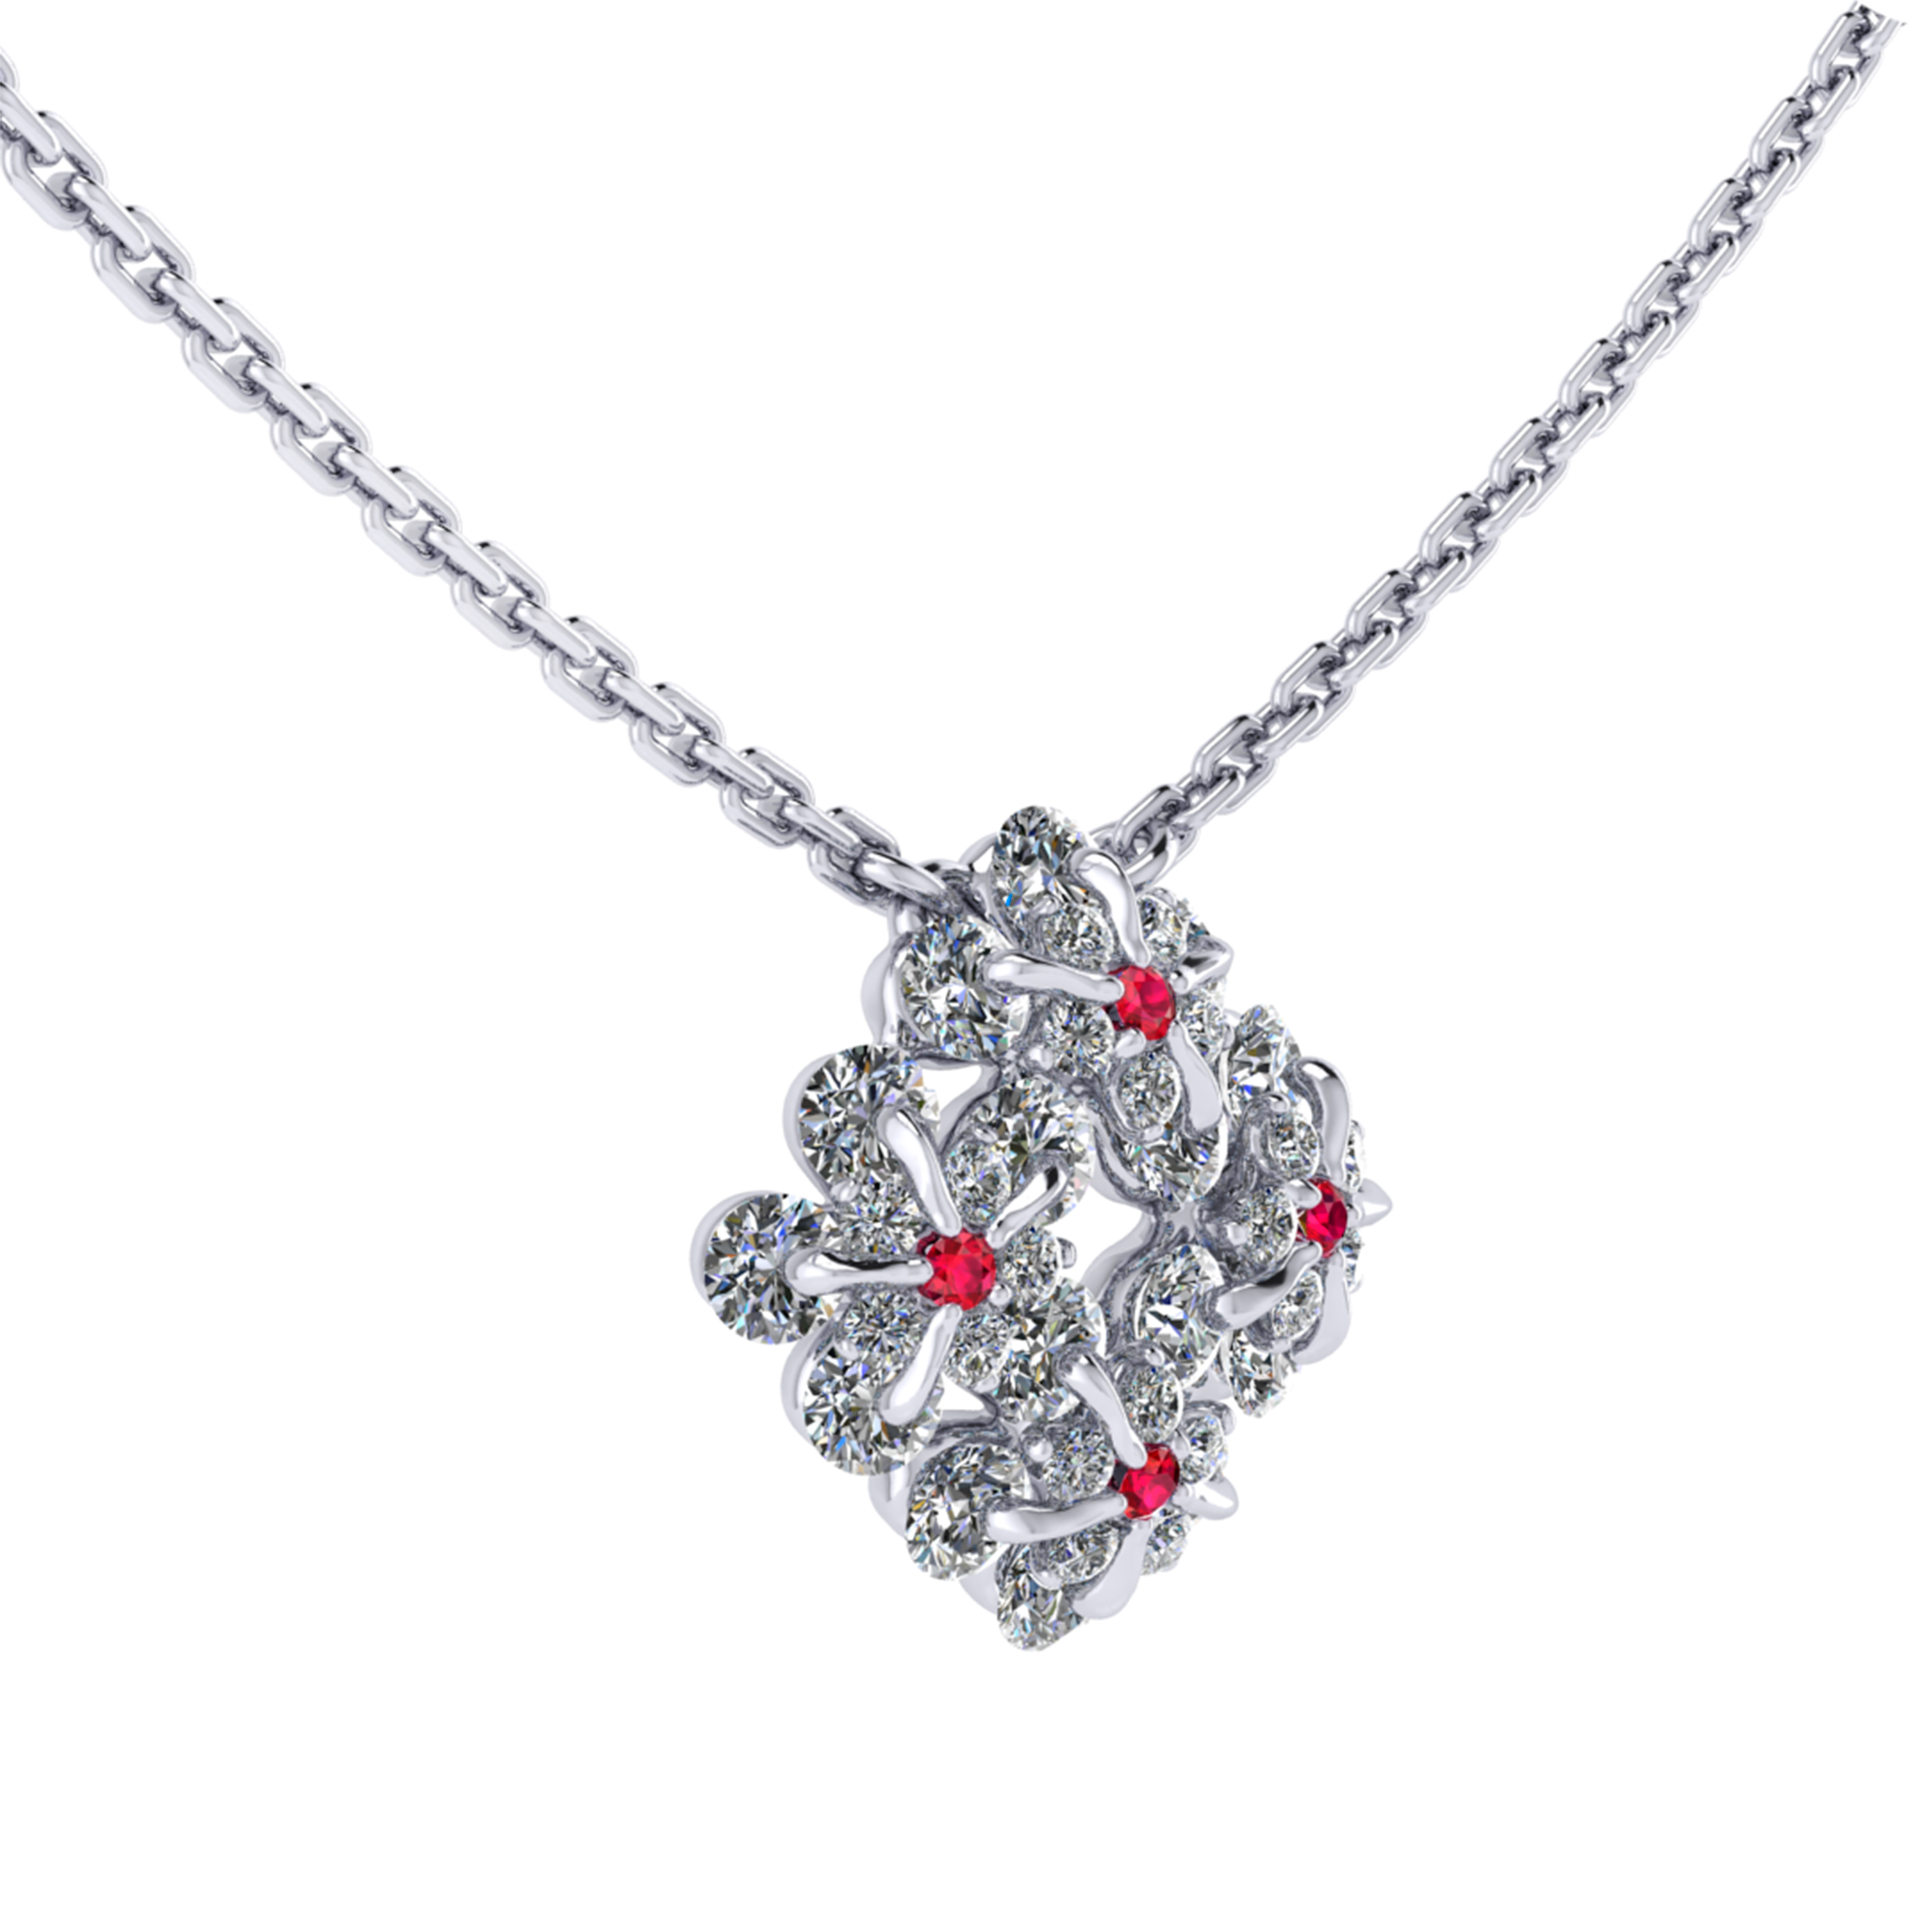 Necklace collection Waltz of Color, MOISEIKIN, Diamond, Ruby, 18K White Gold | Photo 2